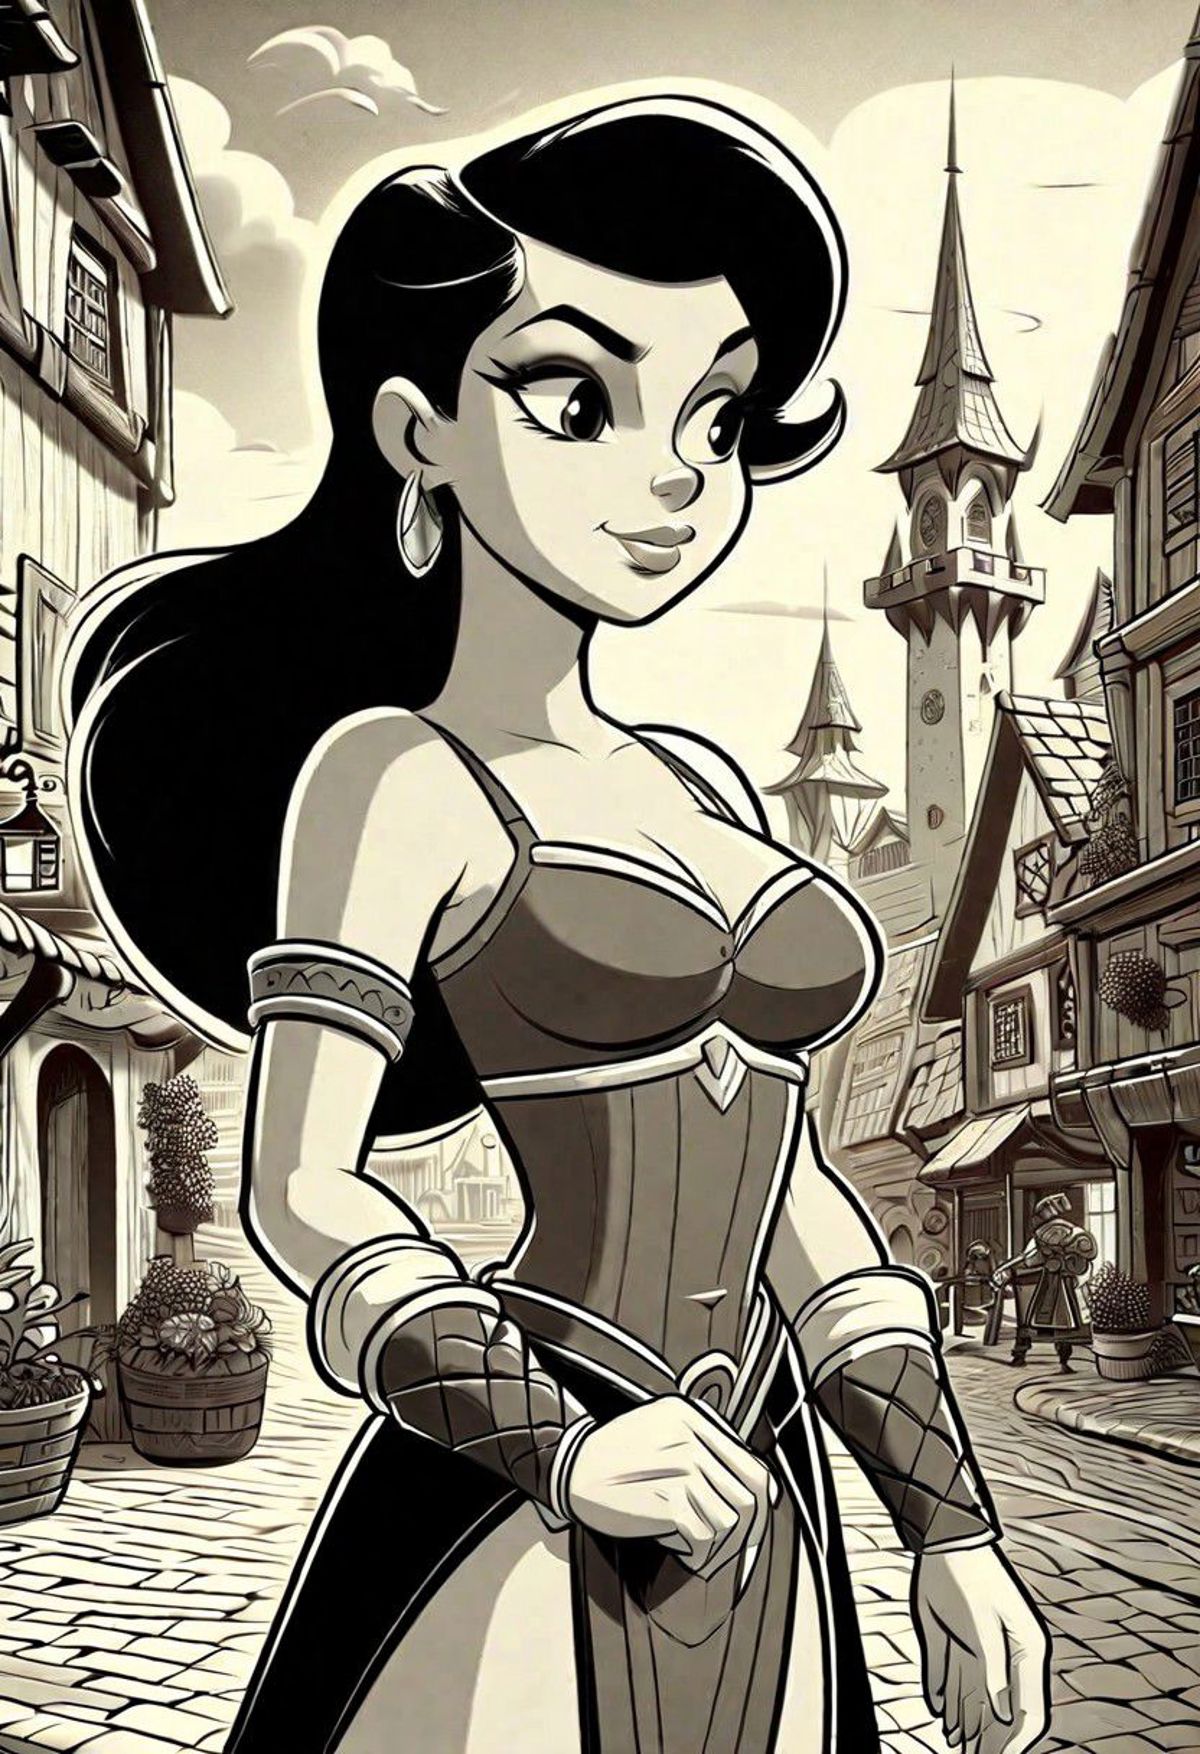 BW Vintage Cartoon image by squiglybob13